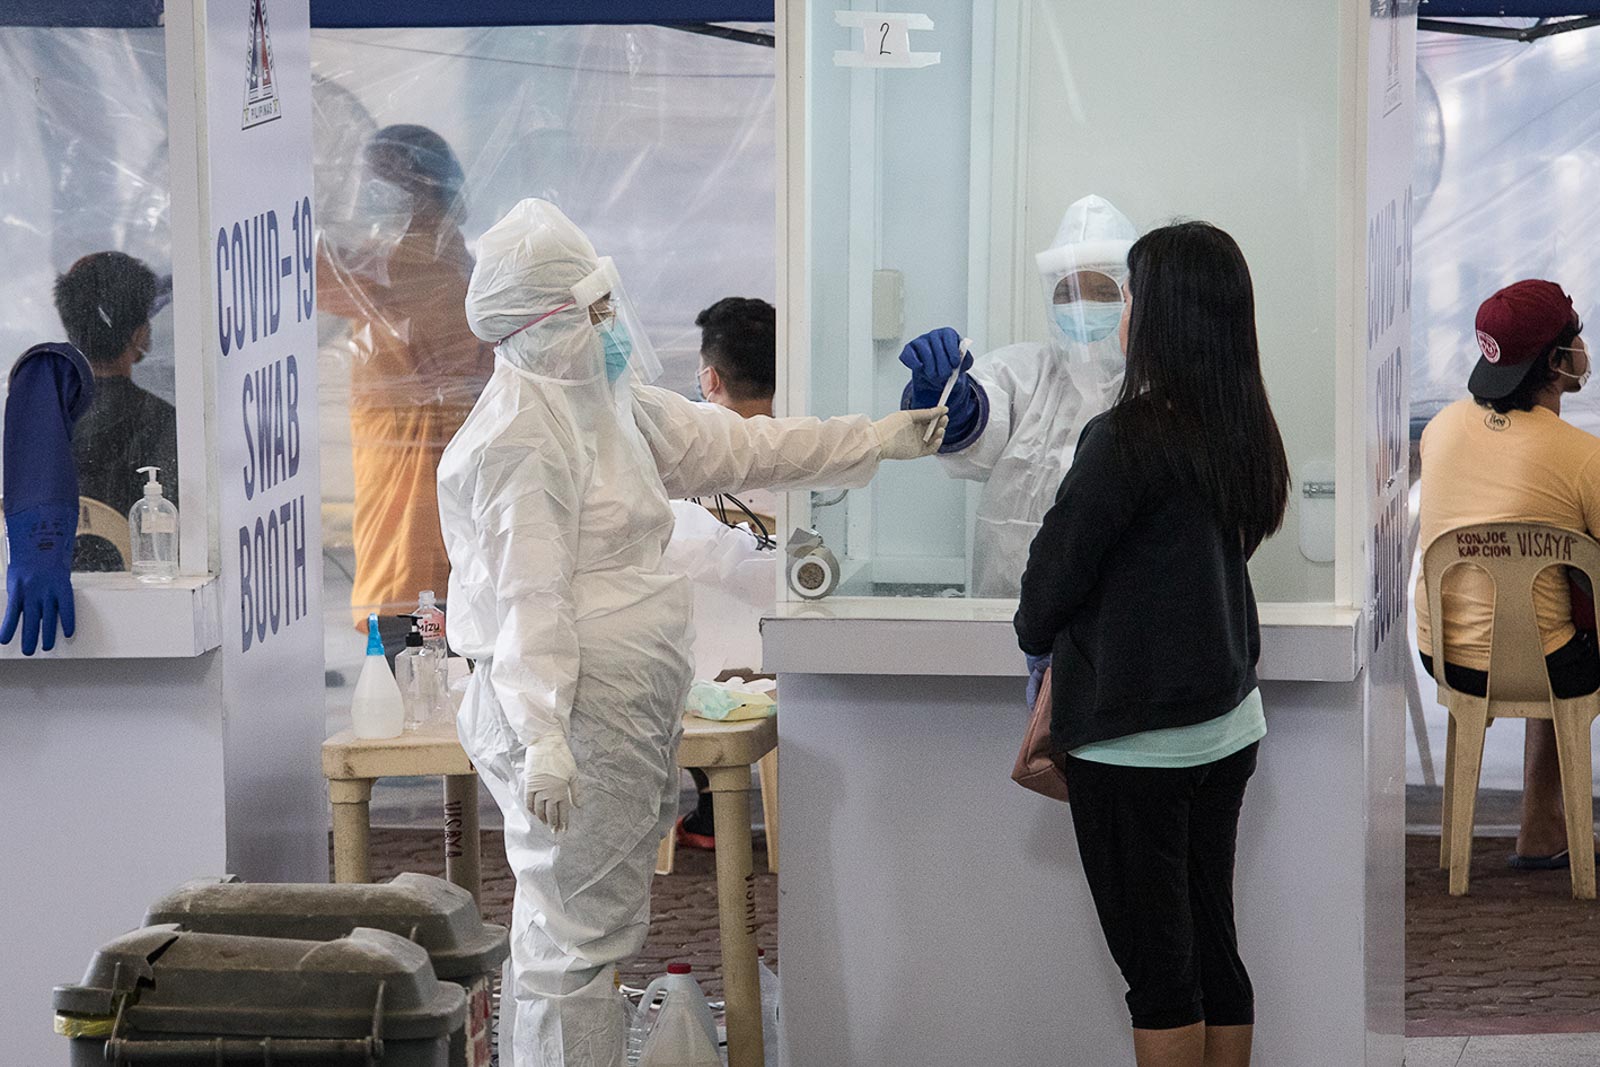 TESTING. Health workers conduct COVID-19 swabbing at the SB Plaza in Novaliches, Quezon City, on May 22, 2020. Photo by Darren Langit/Rappler 